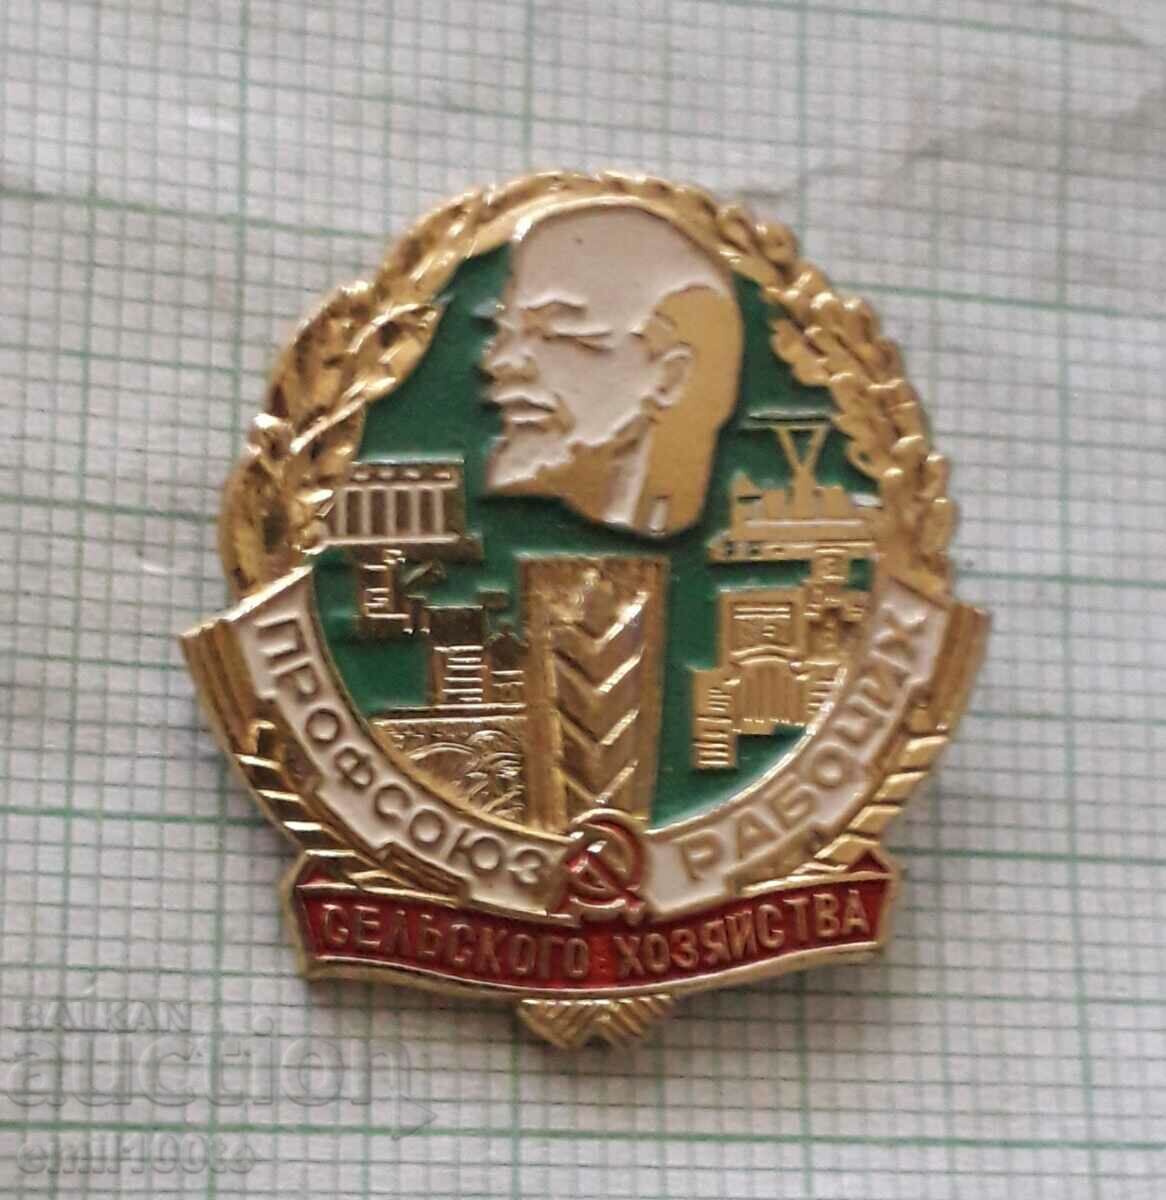 Badge - USSR Agricultural Workers Union